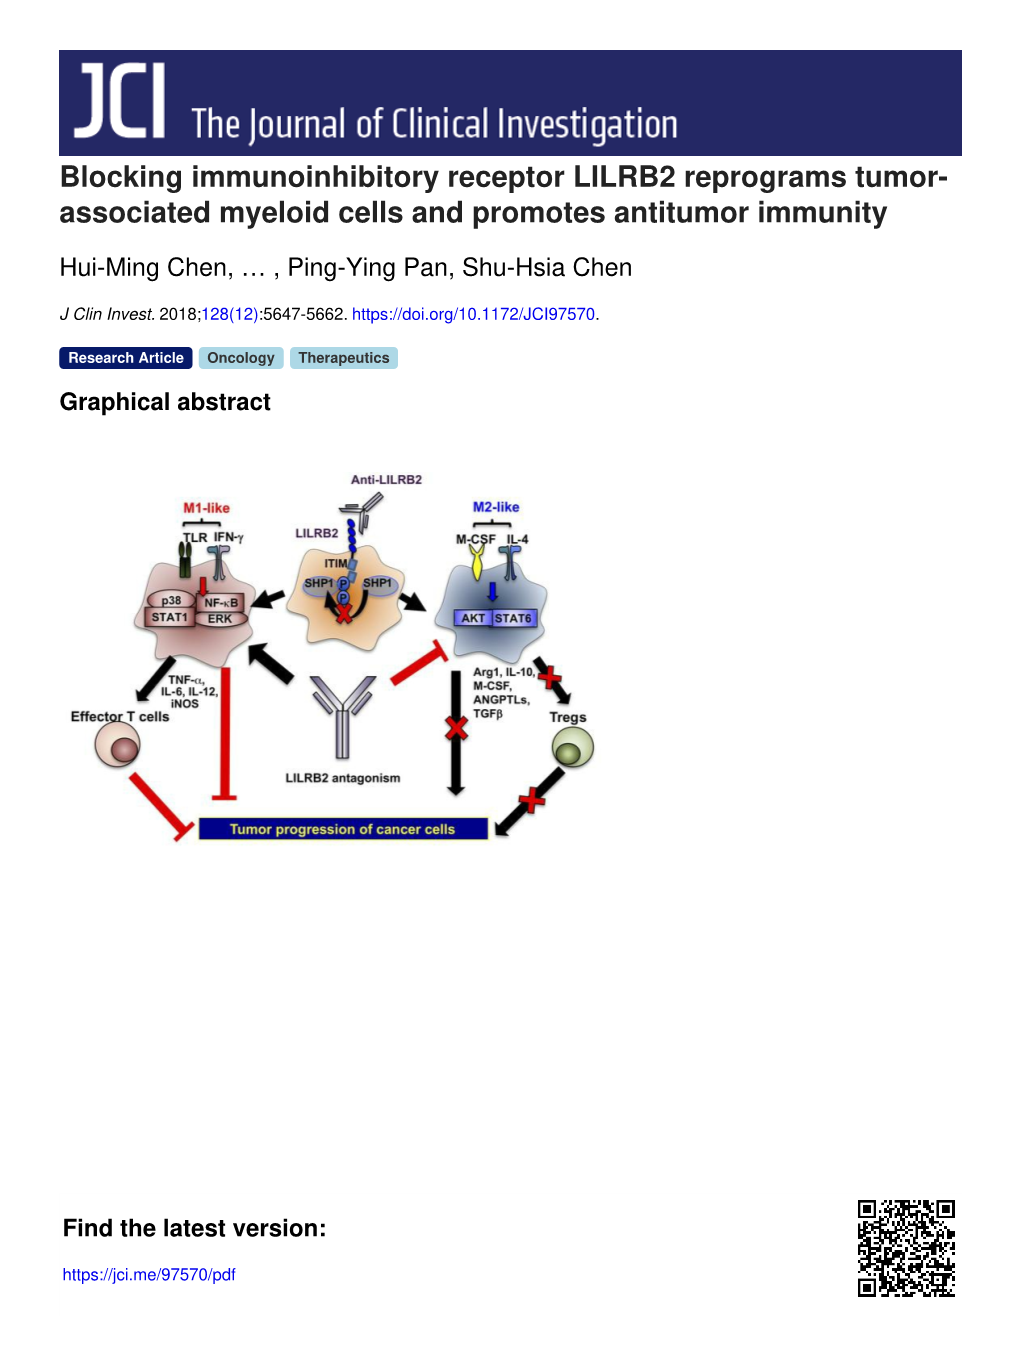 Blocking Immunoinhibitory Receptor LILRB2 Reprograms Tumor- Associated Myeloid Cells and Promotes Antitumor Immunity